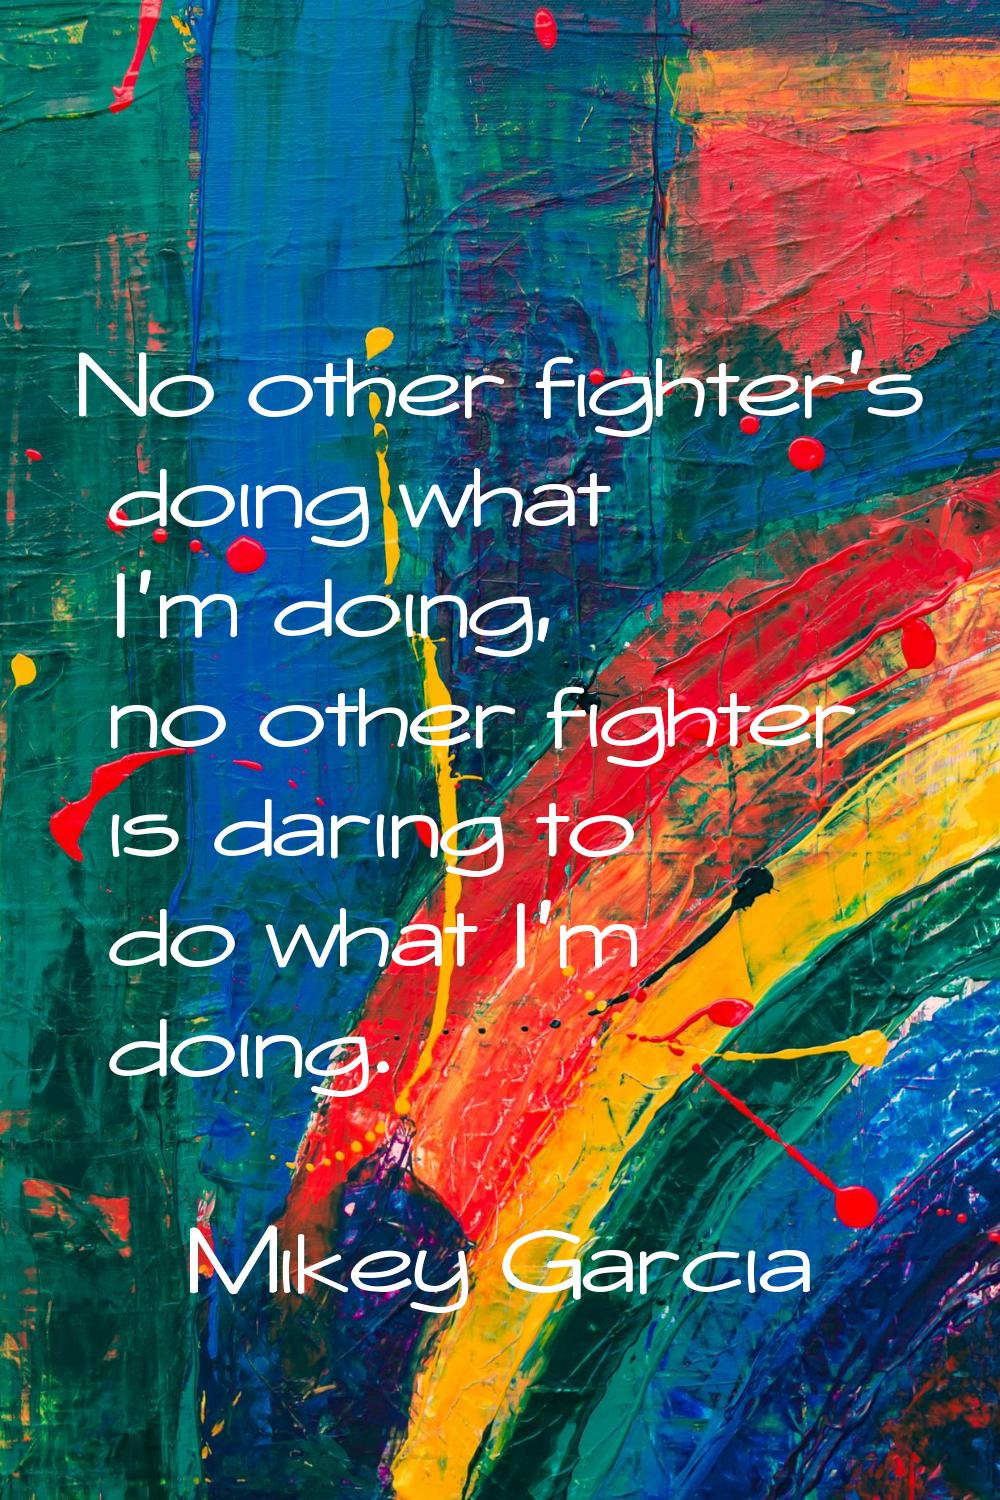 No other fighter's doing what I'm doing, no other fighter is daring to do what I'm doing.